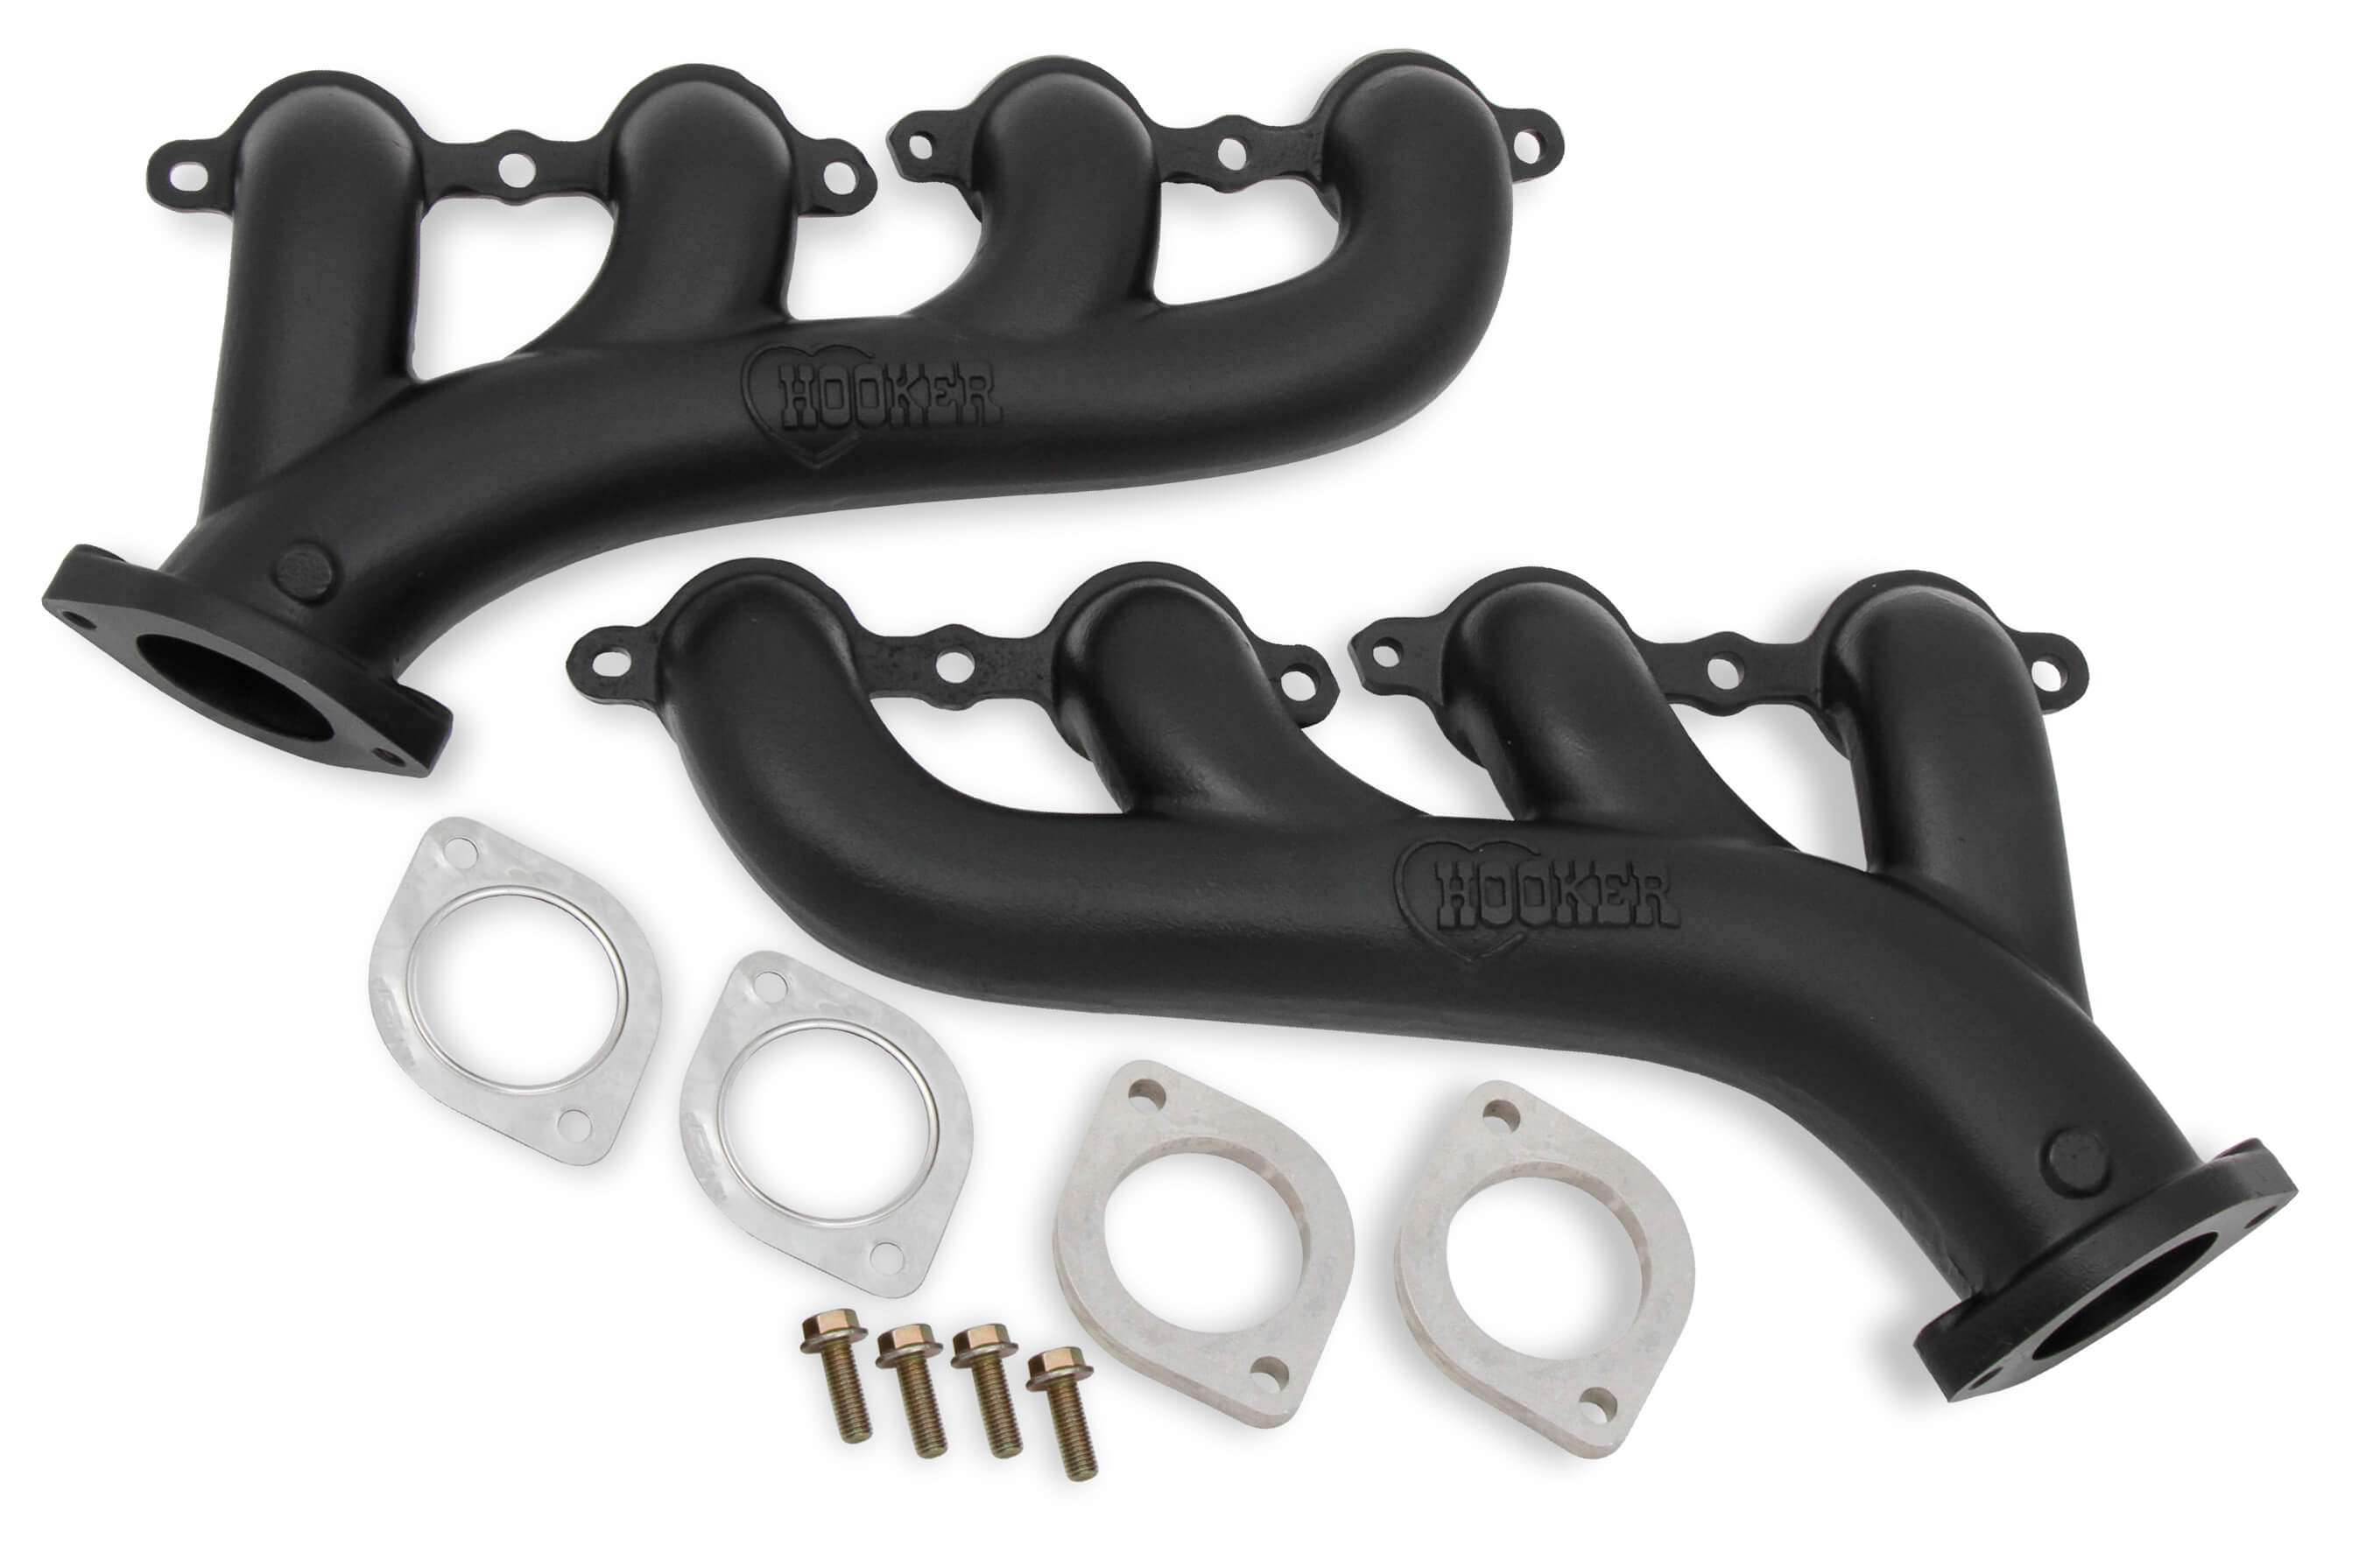 GM LS Series Hooker Headers Exhaust Manifolds w/2.5" Outlet - Black Ceramic Finish